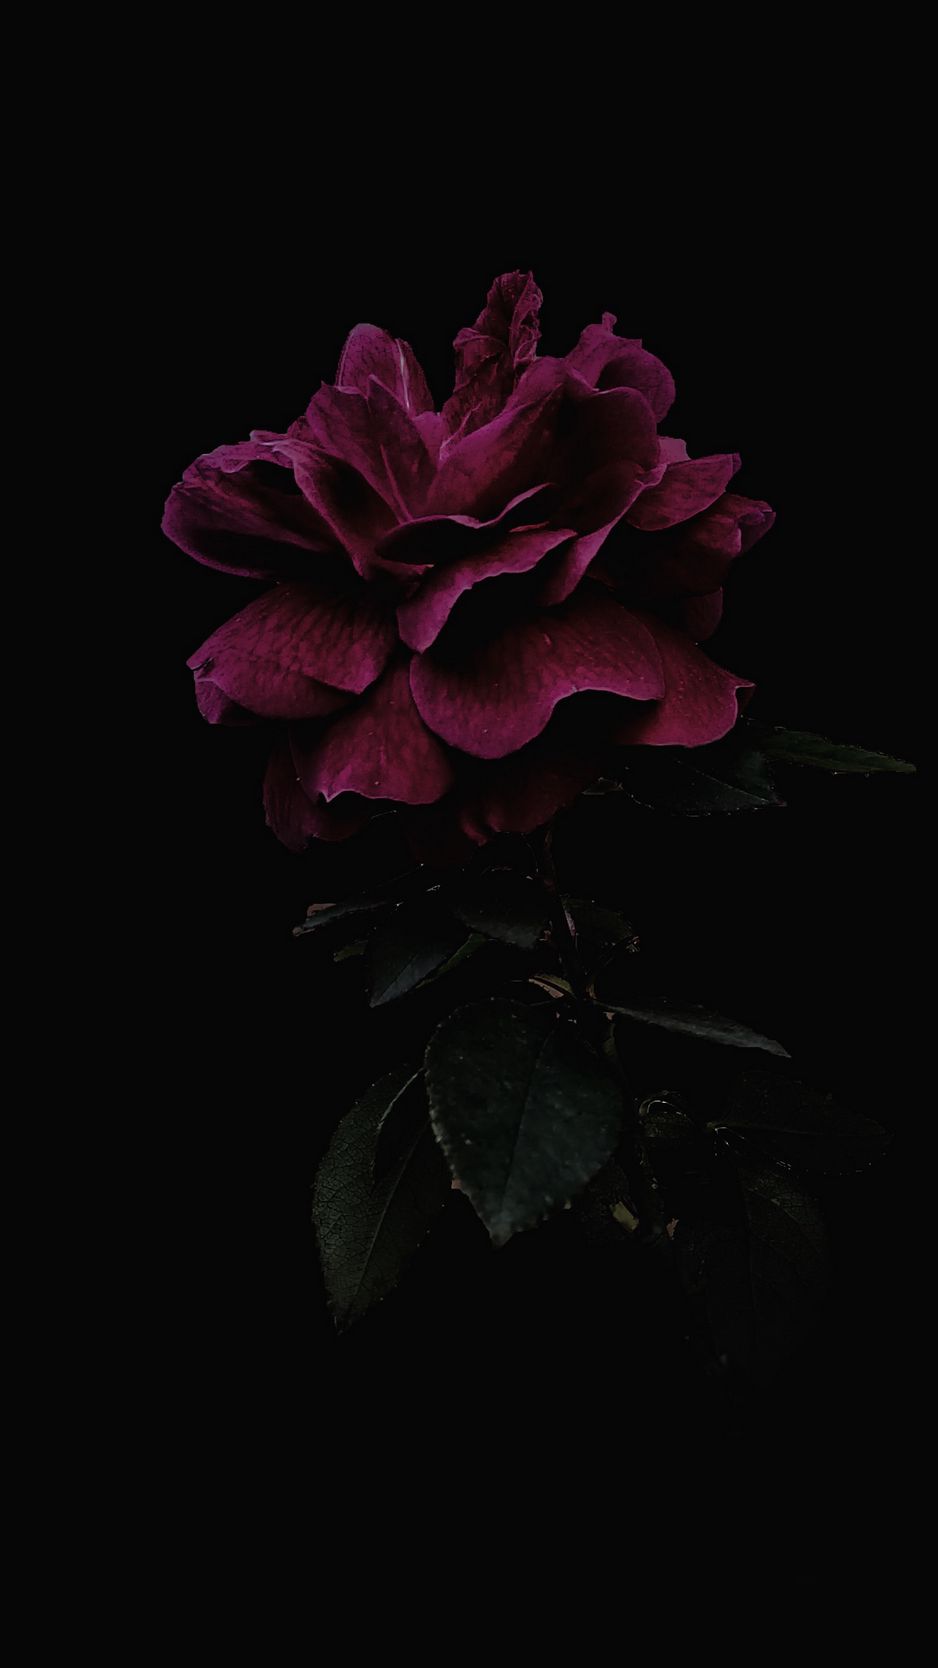 HD wallpaper leaves drops flowers the dark background bright roses   Wallpaper Flare